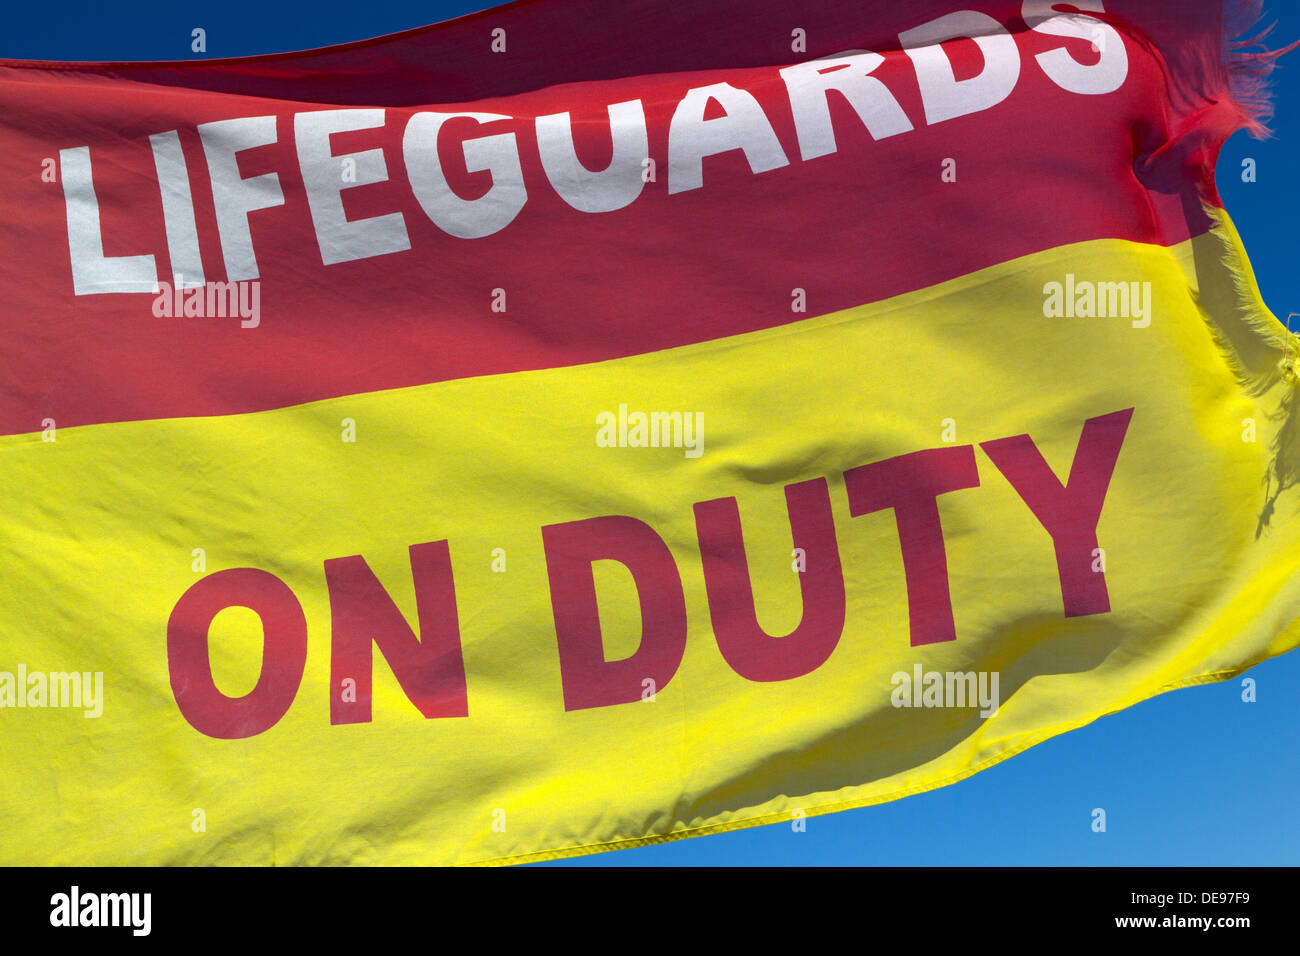 Lifeguards on duty flag at Muizenberg Beach, South Africa. Stock Photo